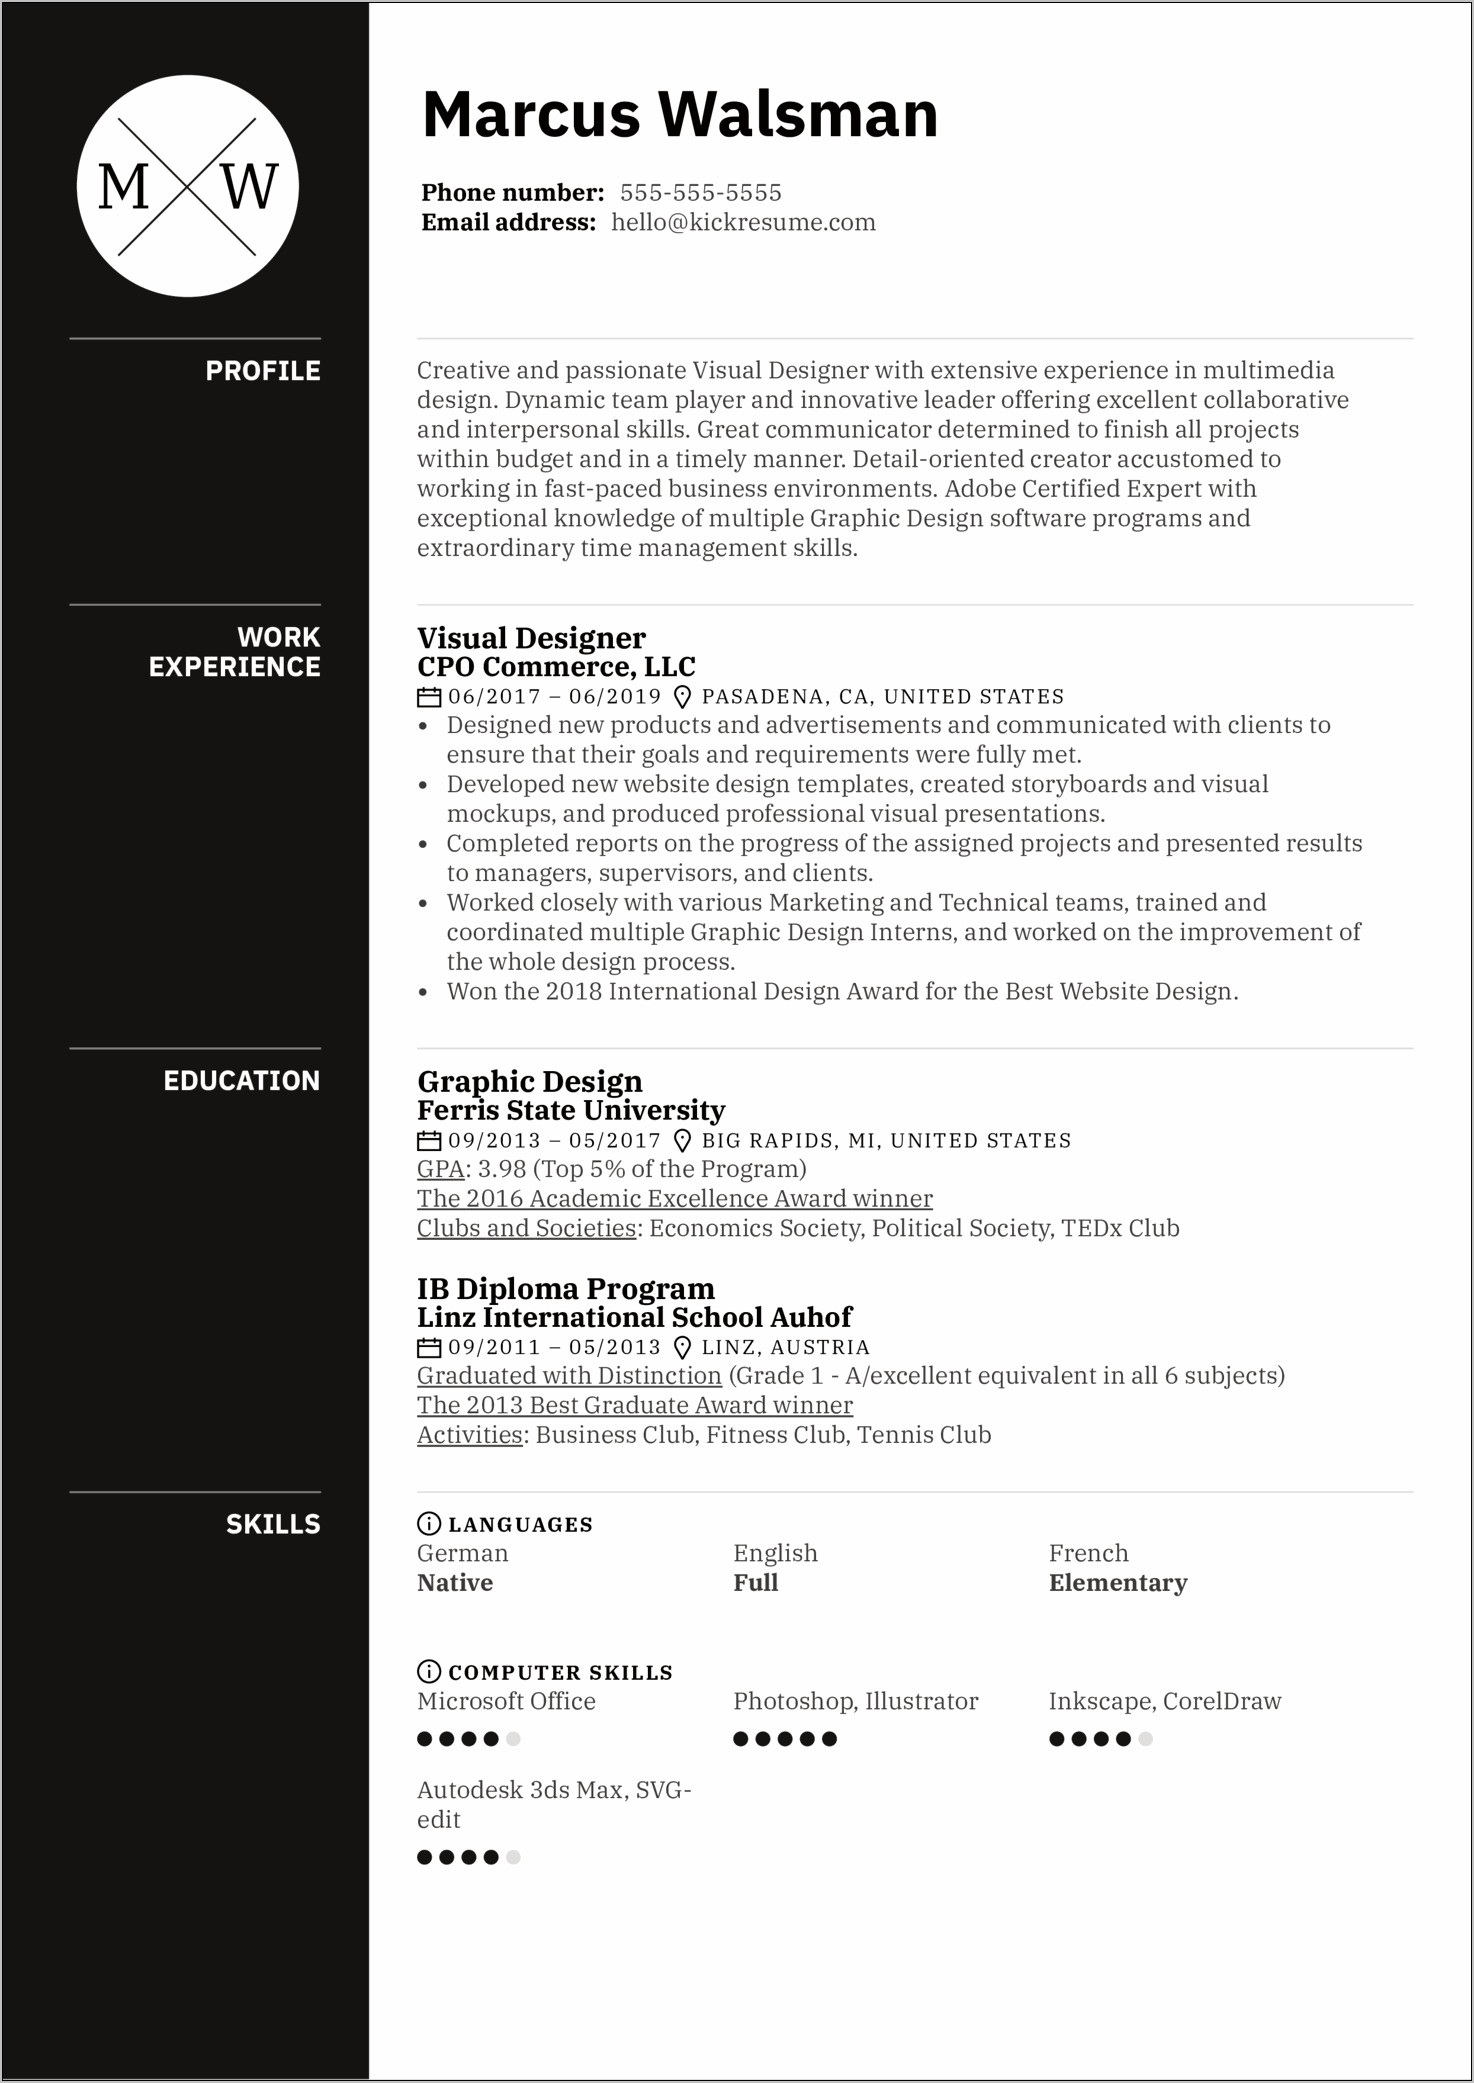 Awesome Skills Based Resume Examples